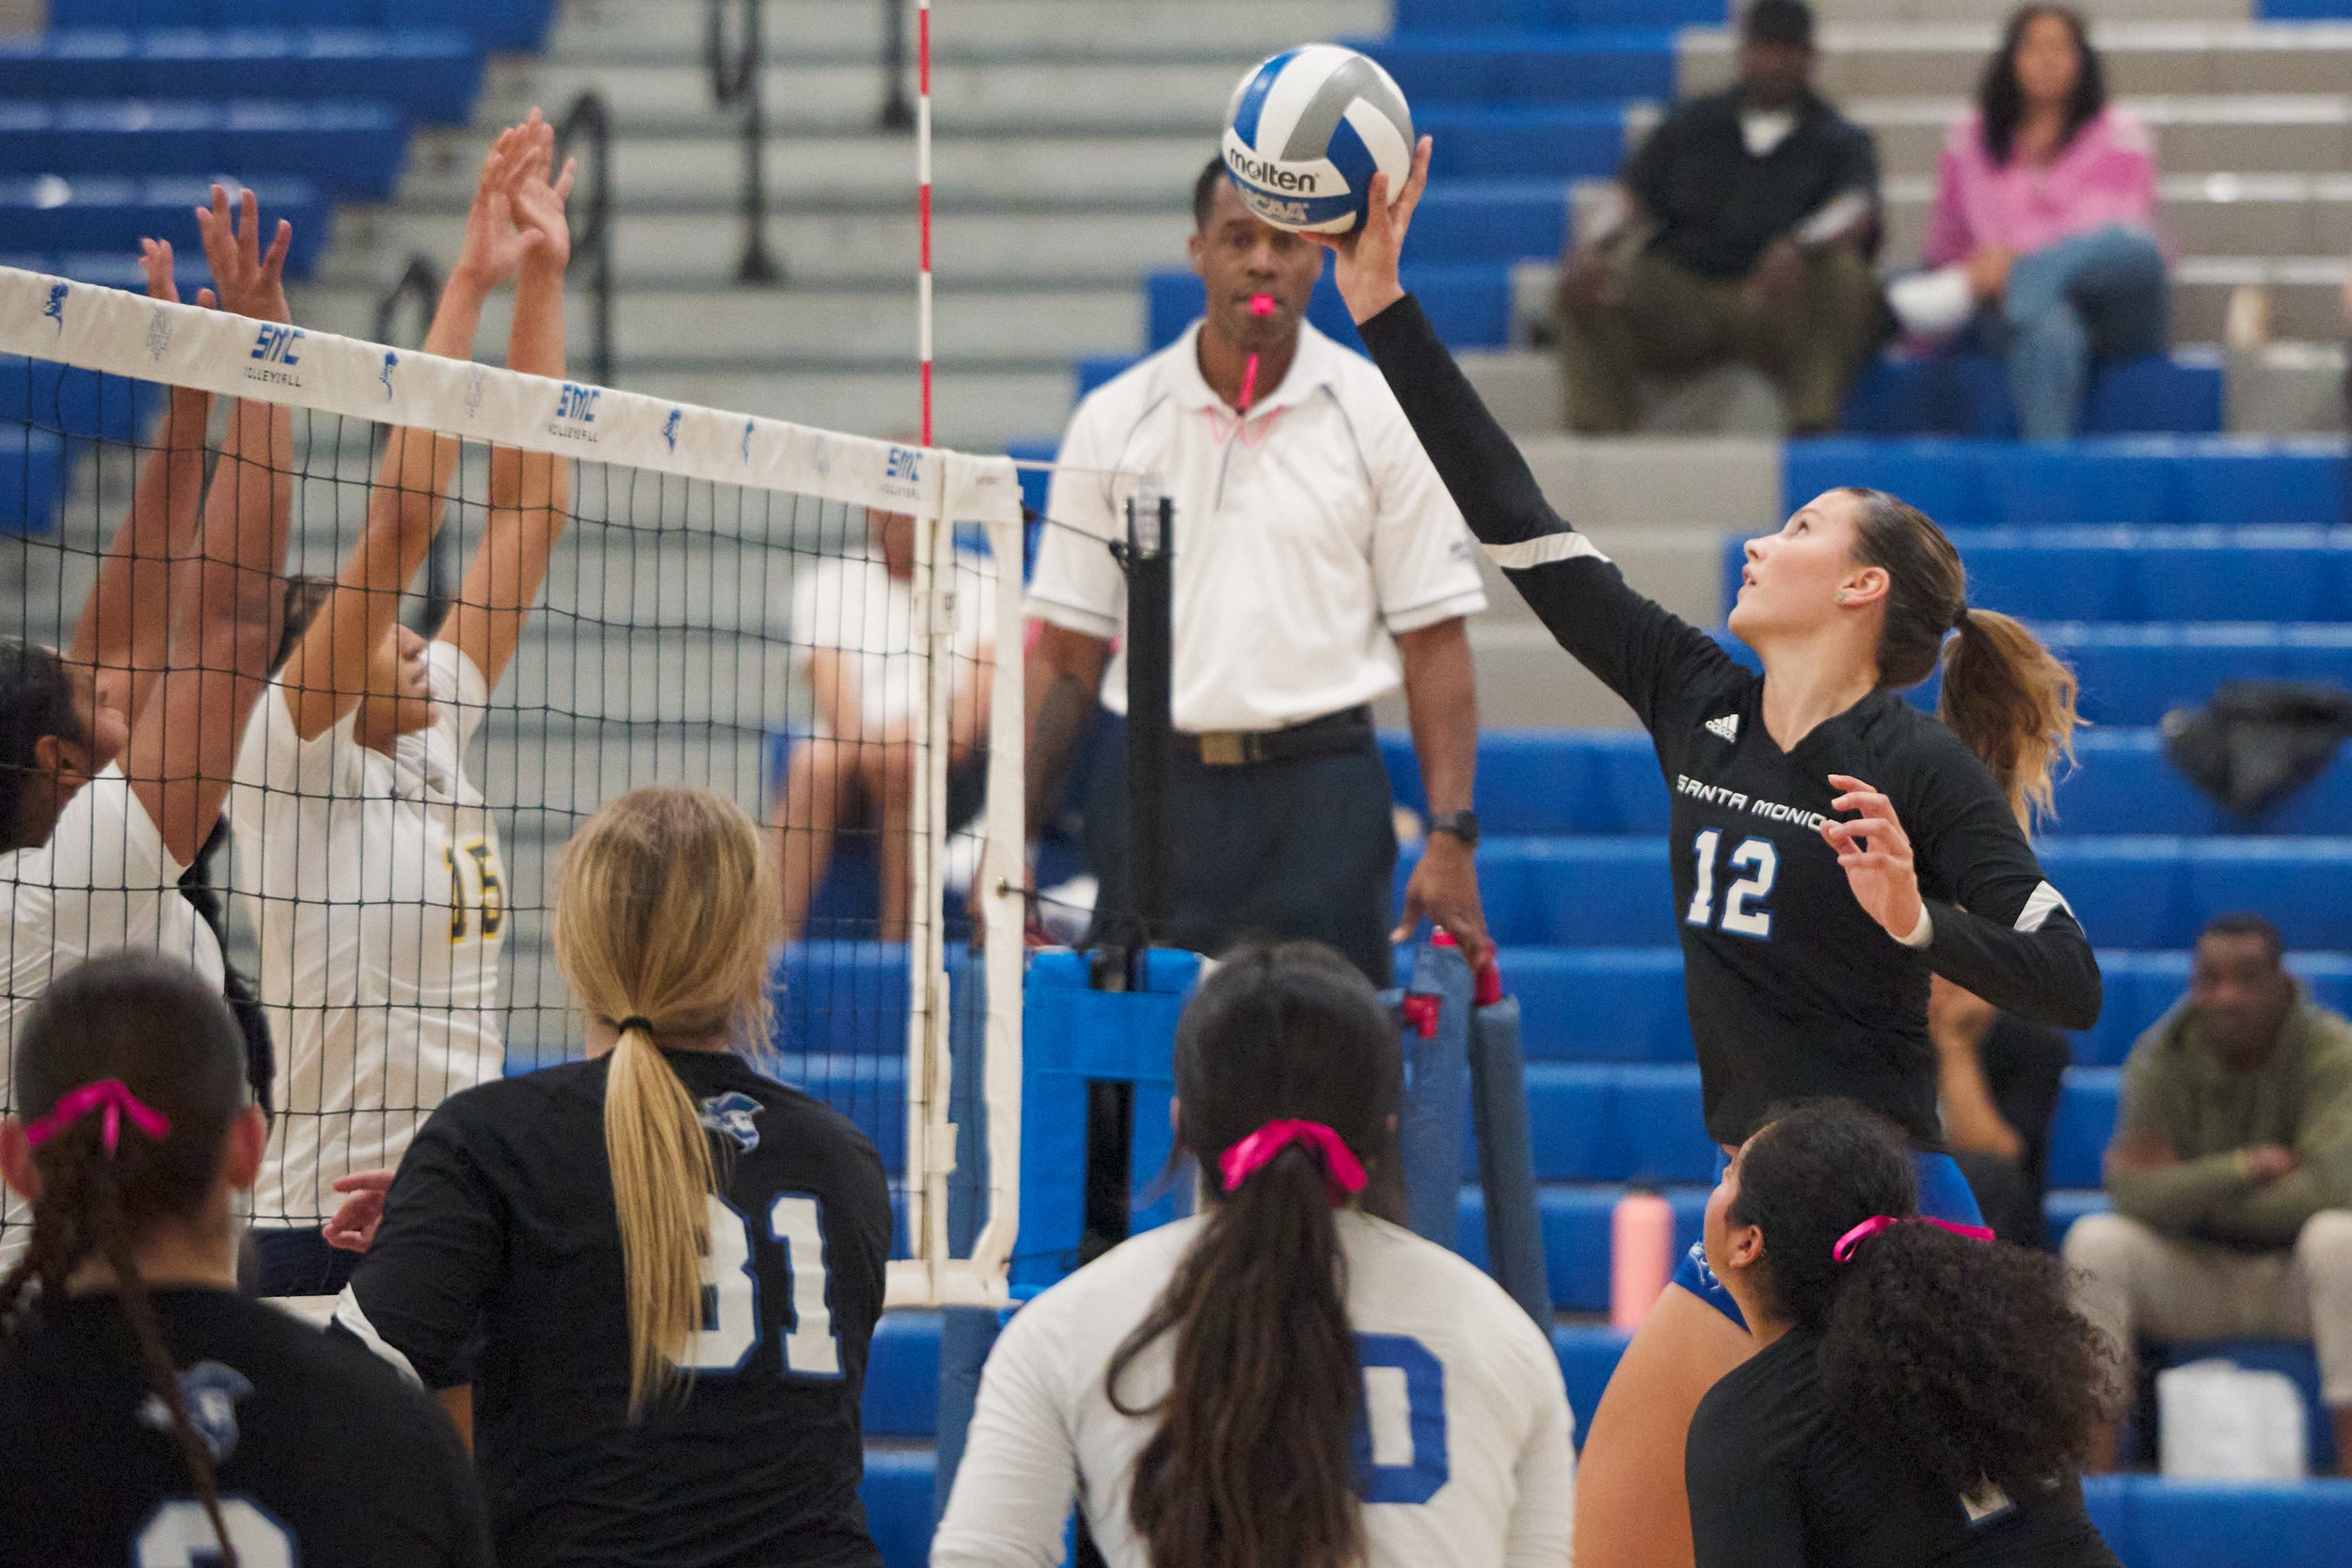  Santa Monica College Corsairs' Mia Paulson (right) hits the ball past College of the Canyons Cougars' (from left) Leah Gillie and Kaireese Johnson during the women's volleyball match on Friday, Oct. 27, 2023, at Corsair Gym in Santa Monica, Calif. T